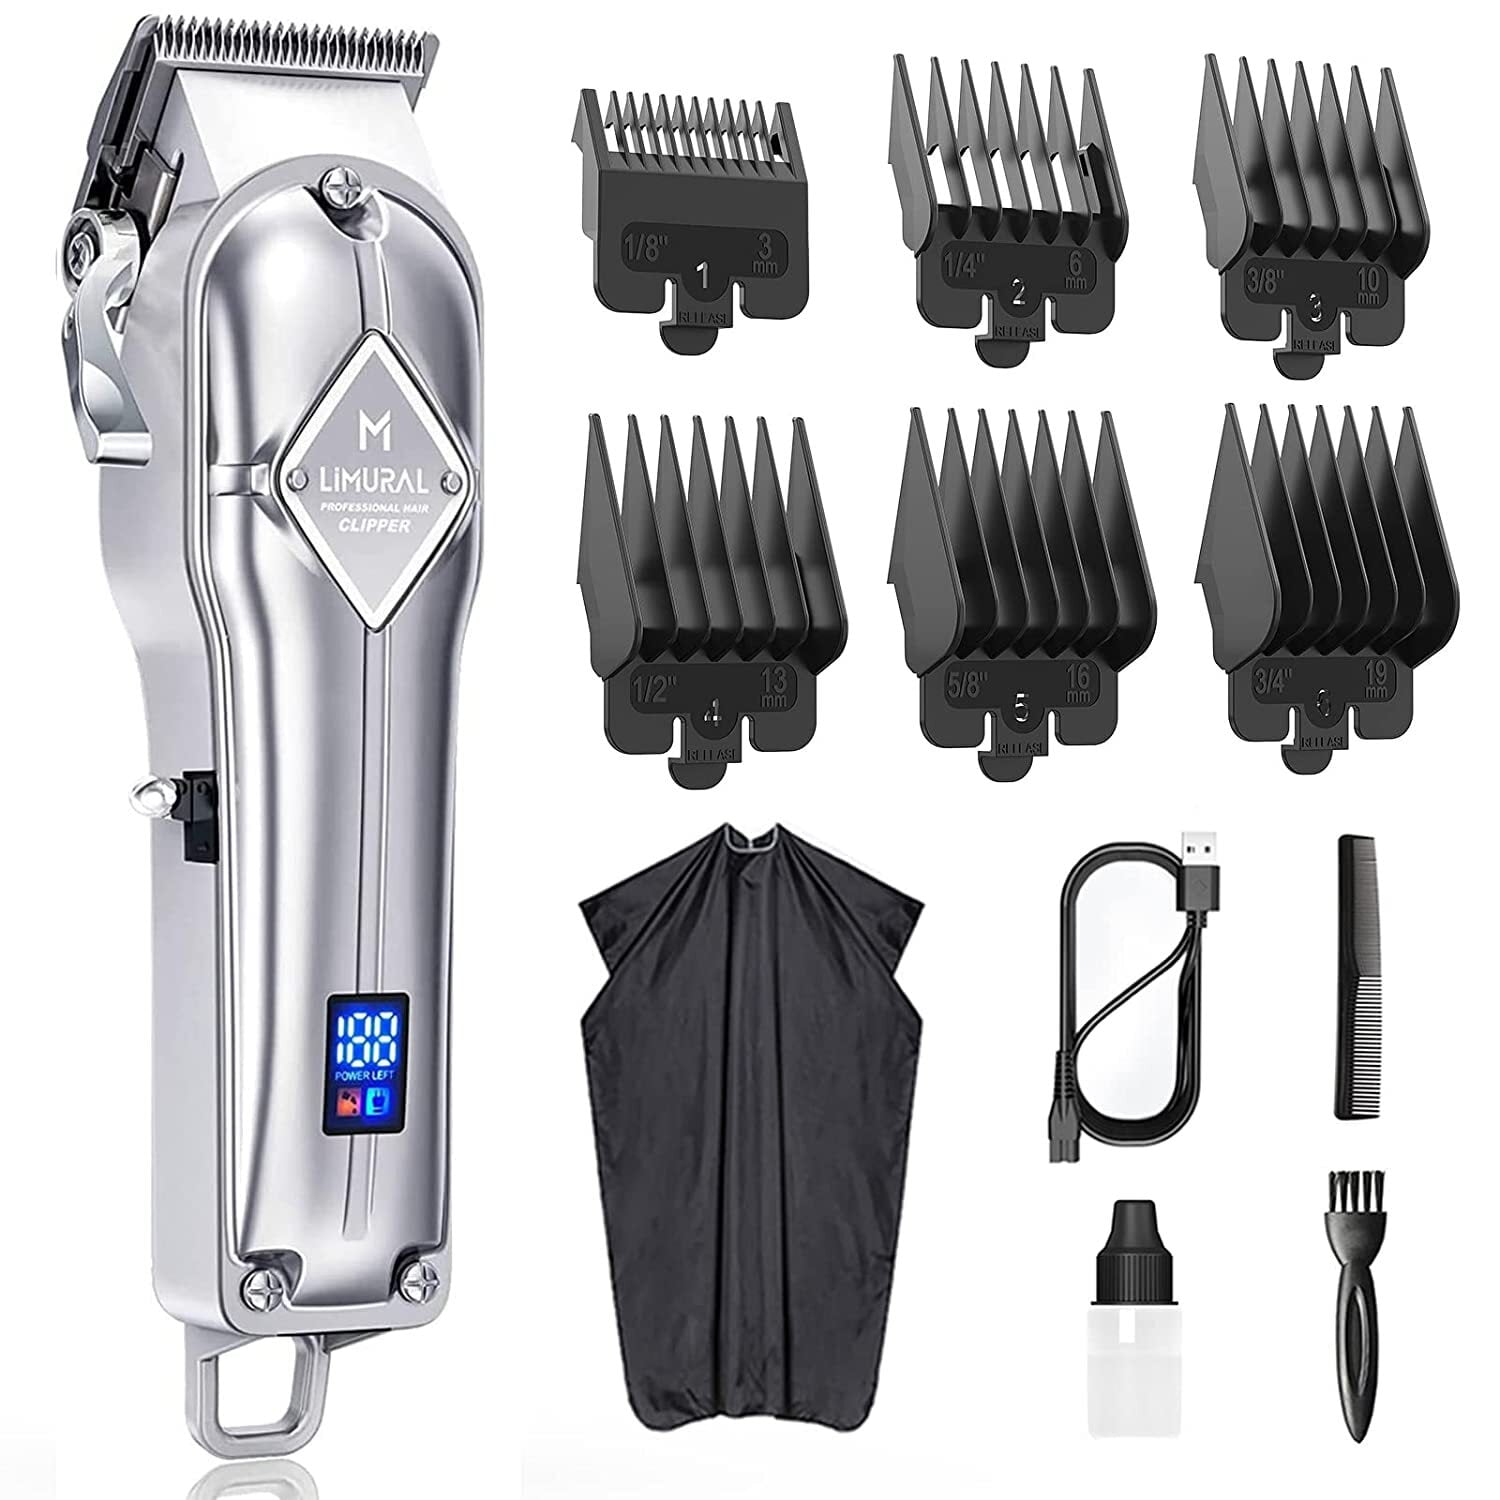 limural Hair Clippers for Men Professional - Cordless Barber Clippers kit  for Hair Cutting & Grooming, Rechargeable Beard Trimmer with Large LED  Display & Silver Metal Casing 